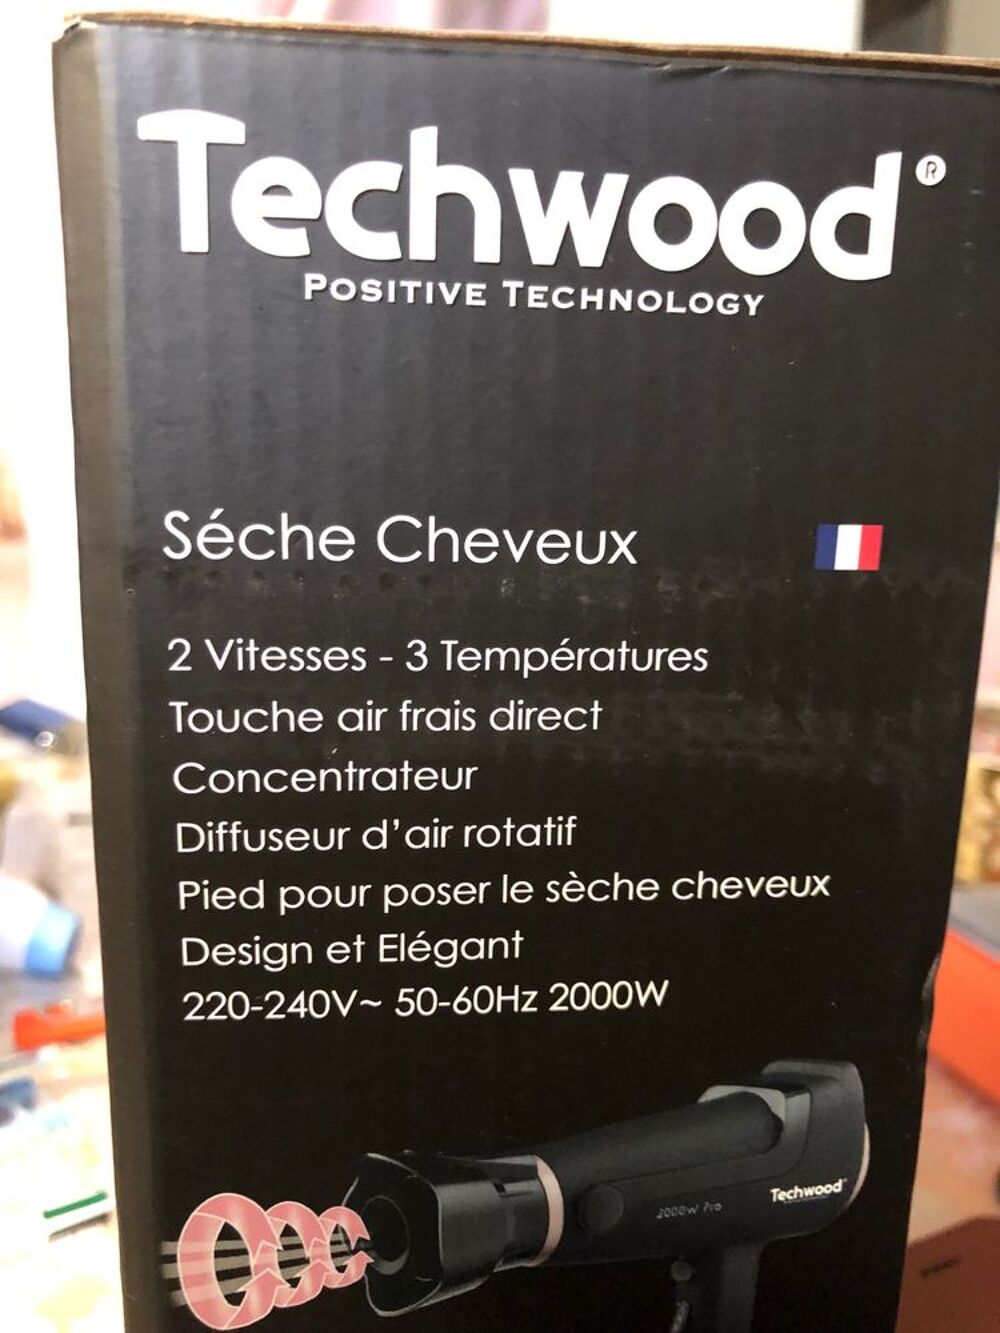 S&egrave;che cheveux Techwood 2000 W Electromnager